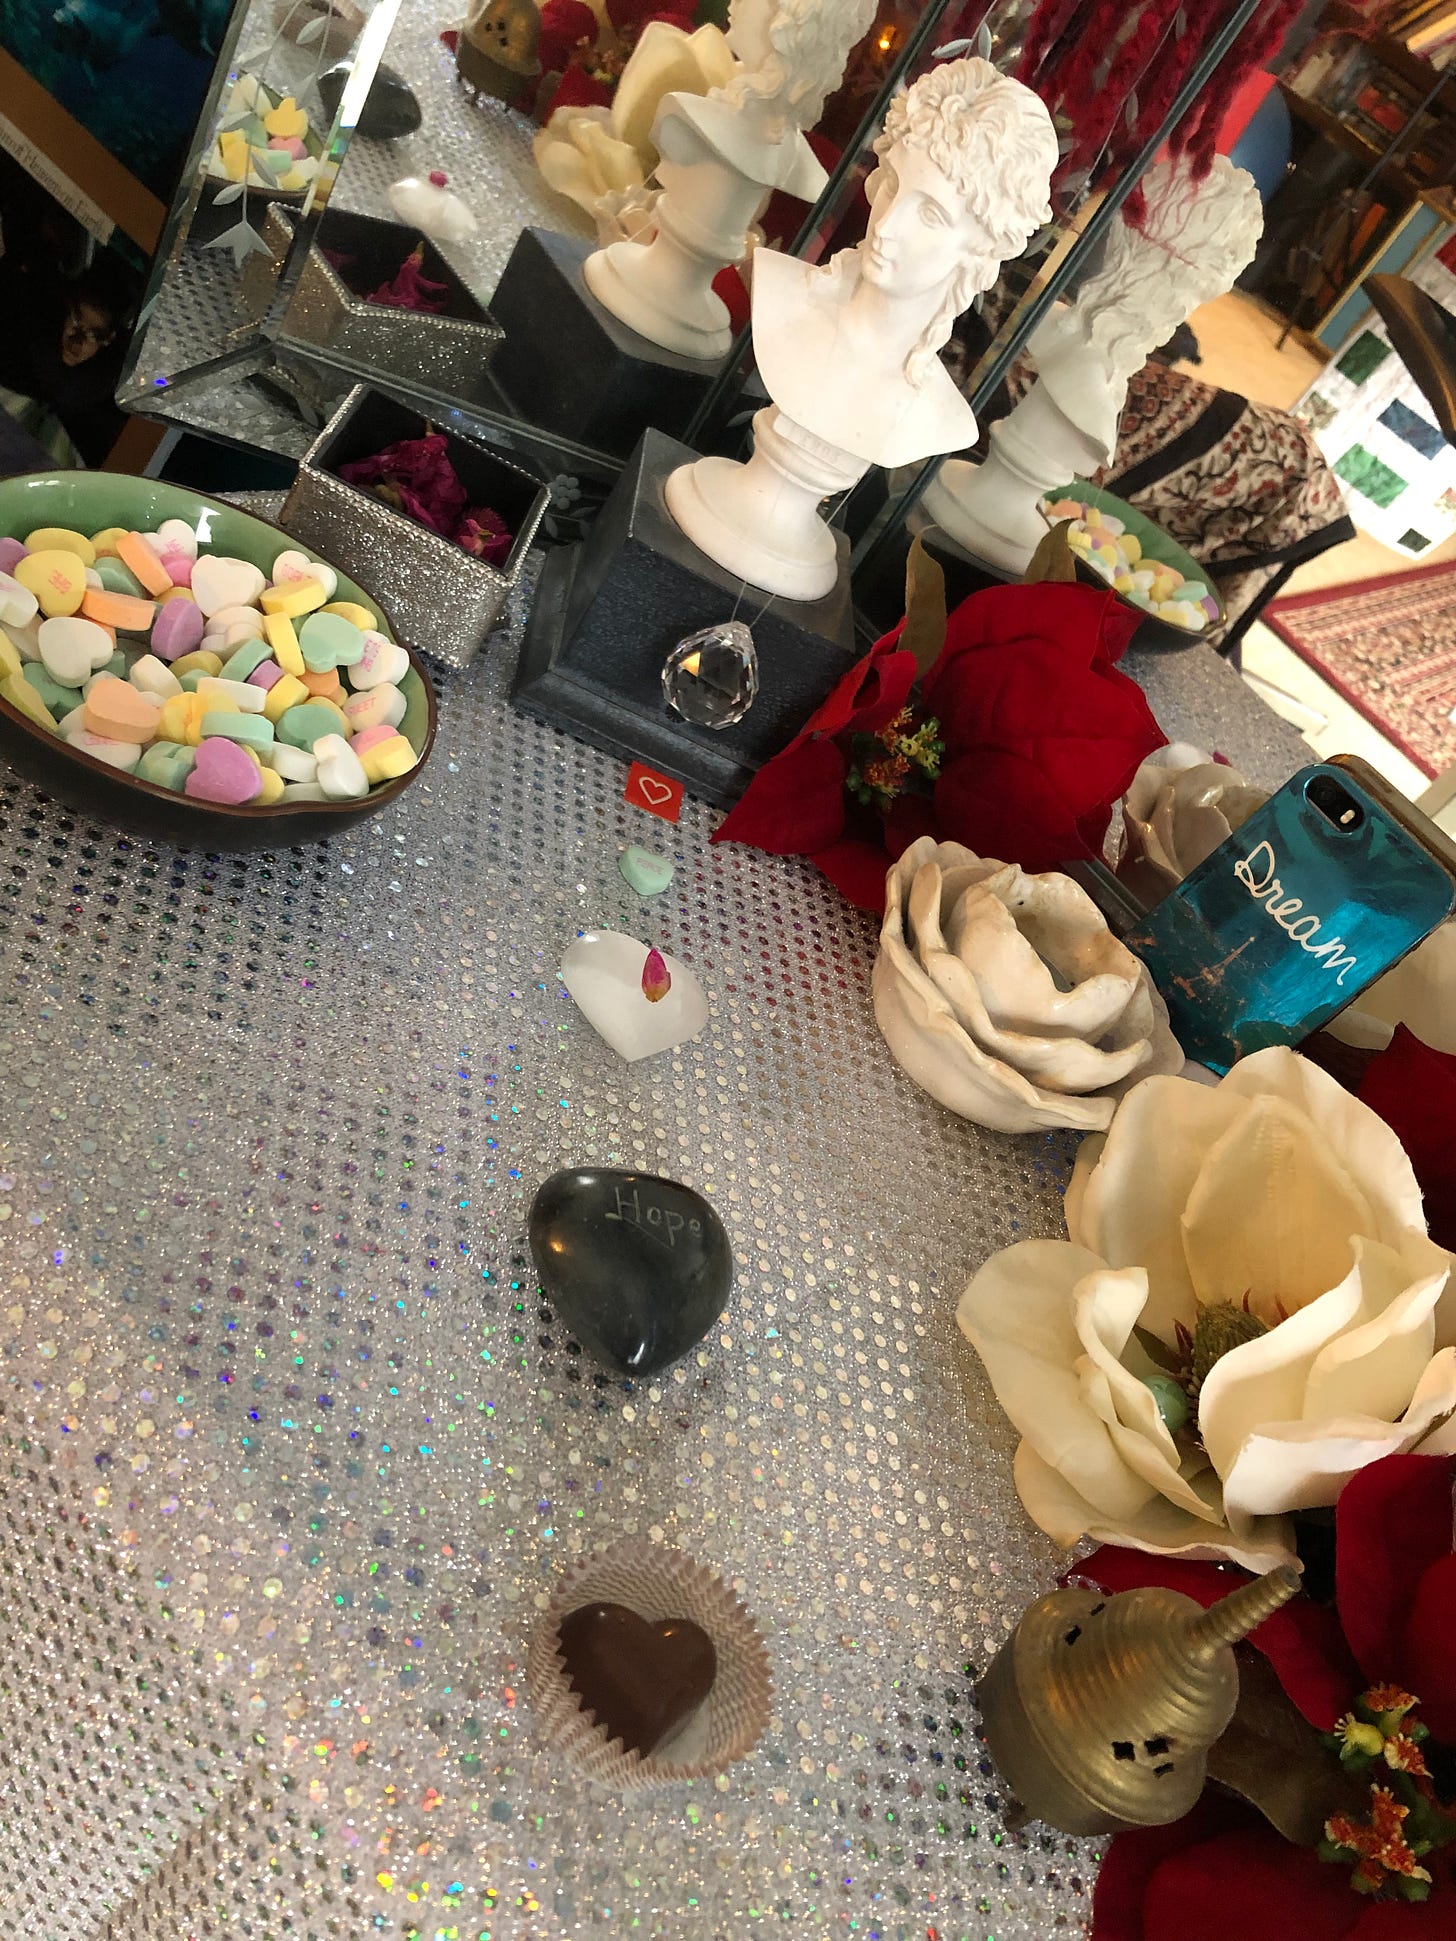 A bust of Eros, God of Love, overlooks an altar filled with silk flowers, crystals, and a bowl of candy conversation hearts. A line of other hearts from the chocolate to the stone leads from where you sit up to Eros. One pink flower bud dots a white crystal heart. A shiny teal phone case says, "Dream." And a polished gray stone heart says, "Hope."